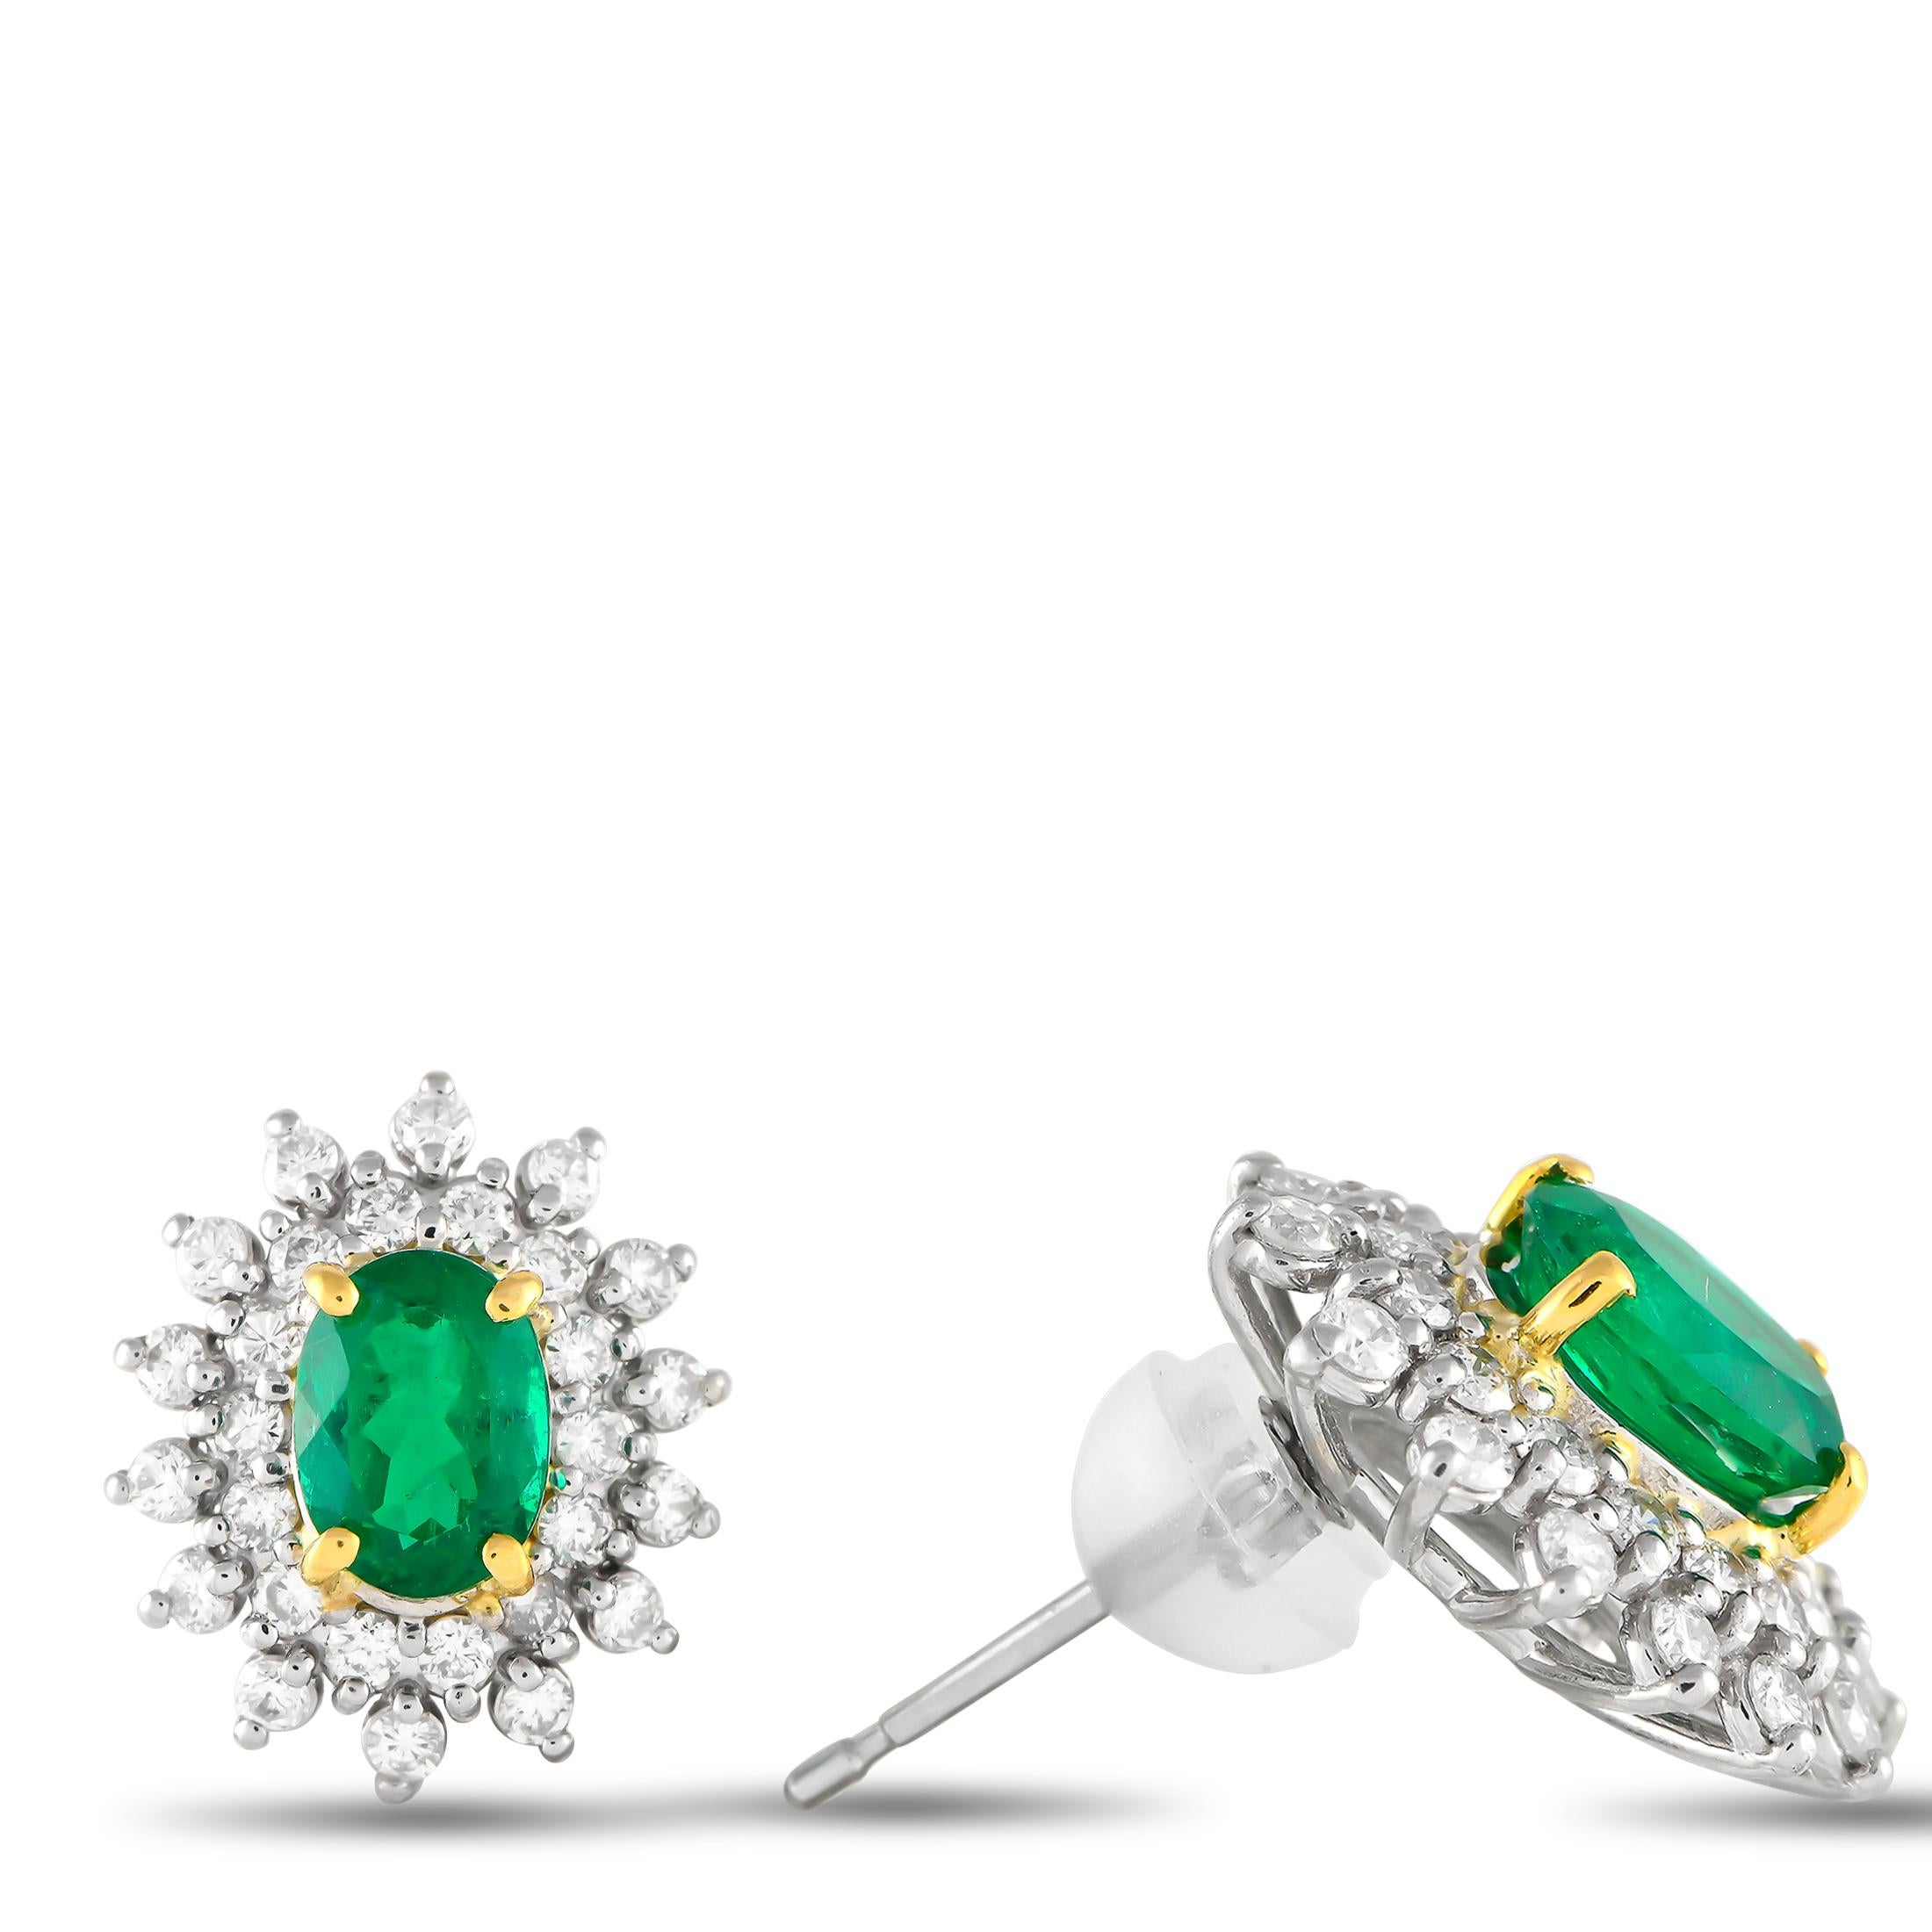 These earrings are ready to provide a sophisticated splash of color and sparkle to your outfits. Each earring features an oval emerald center stone secured by yellow gold prongs. The richness of the green gem is enhanced by the icy white brilliance